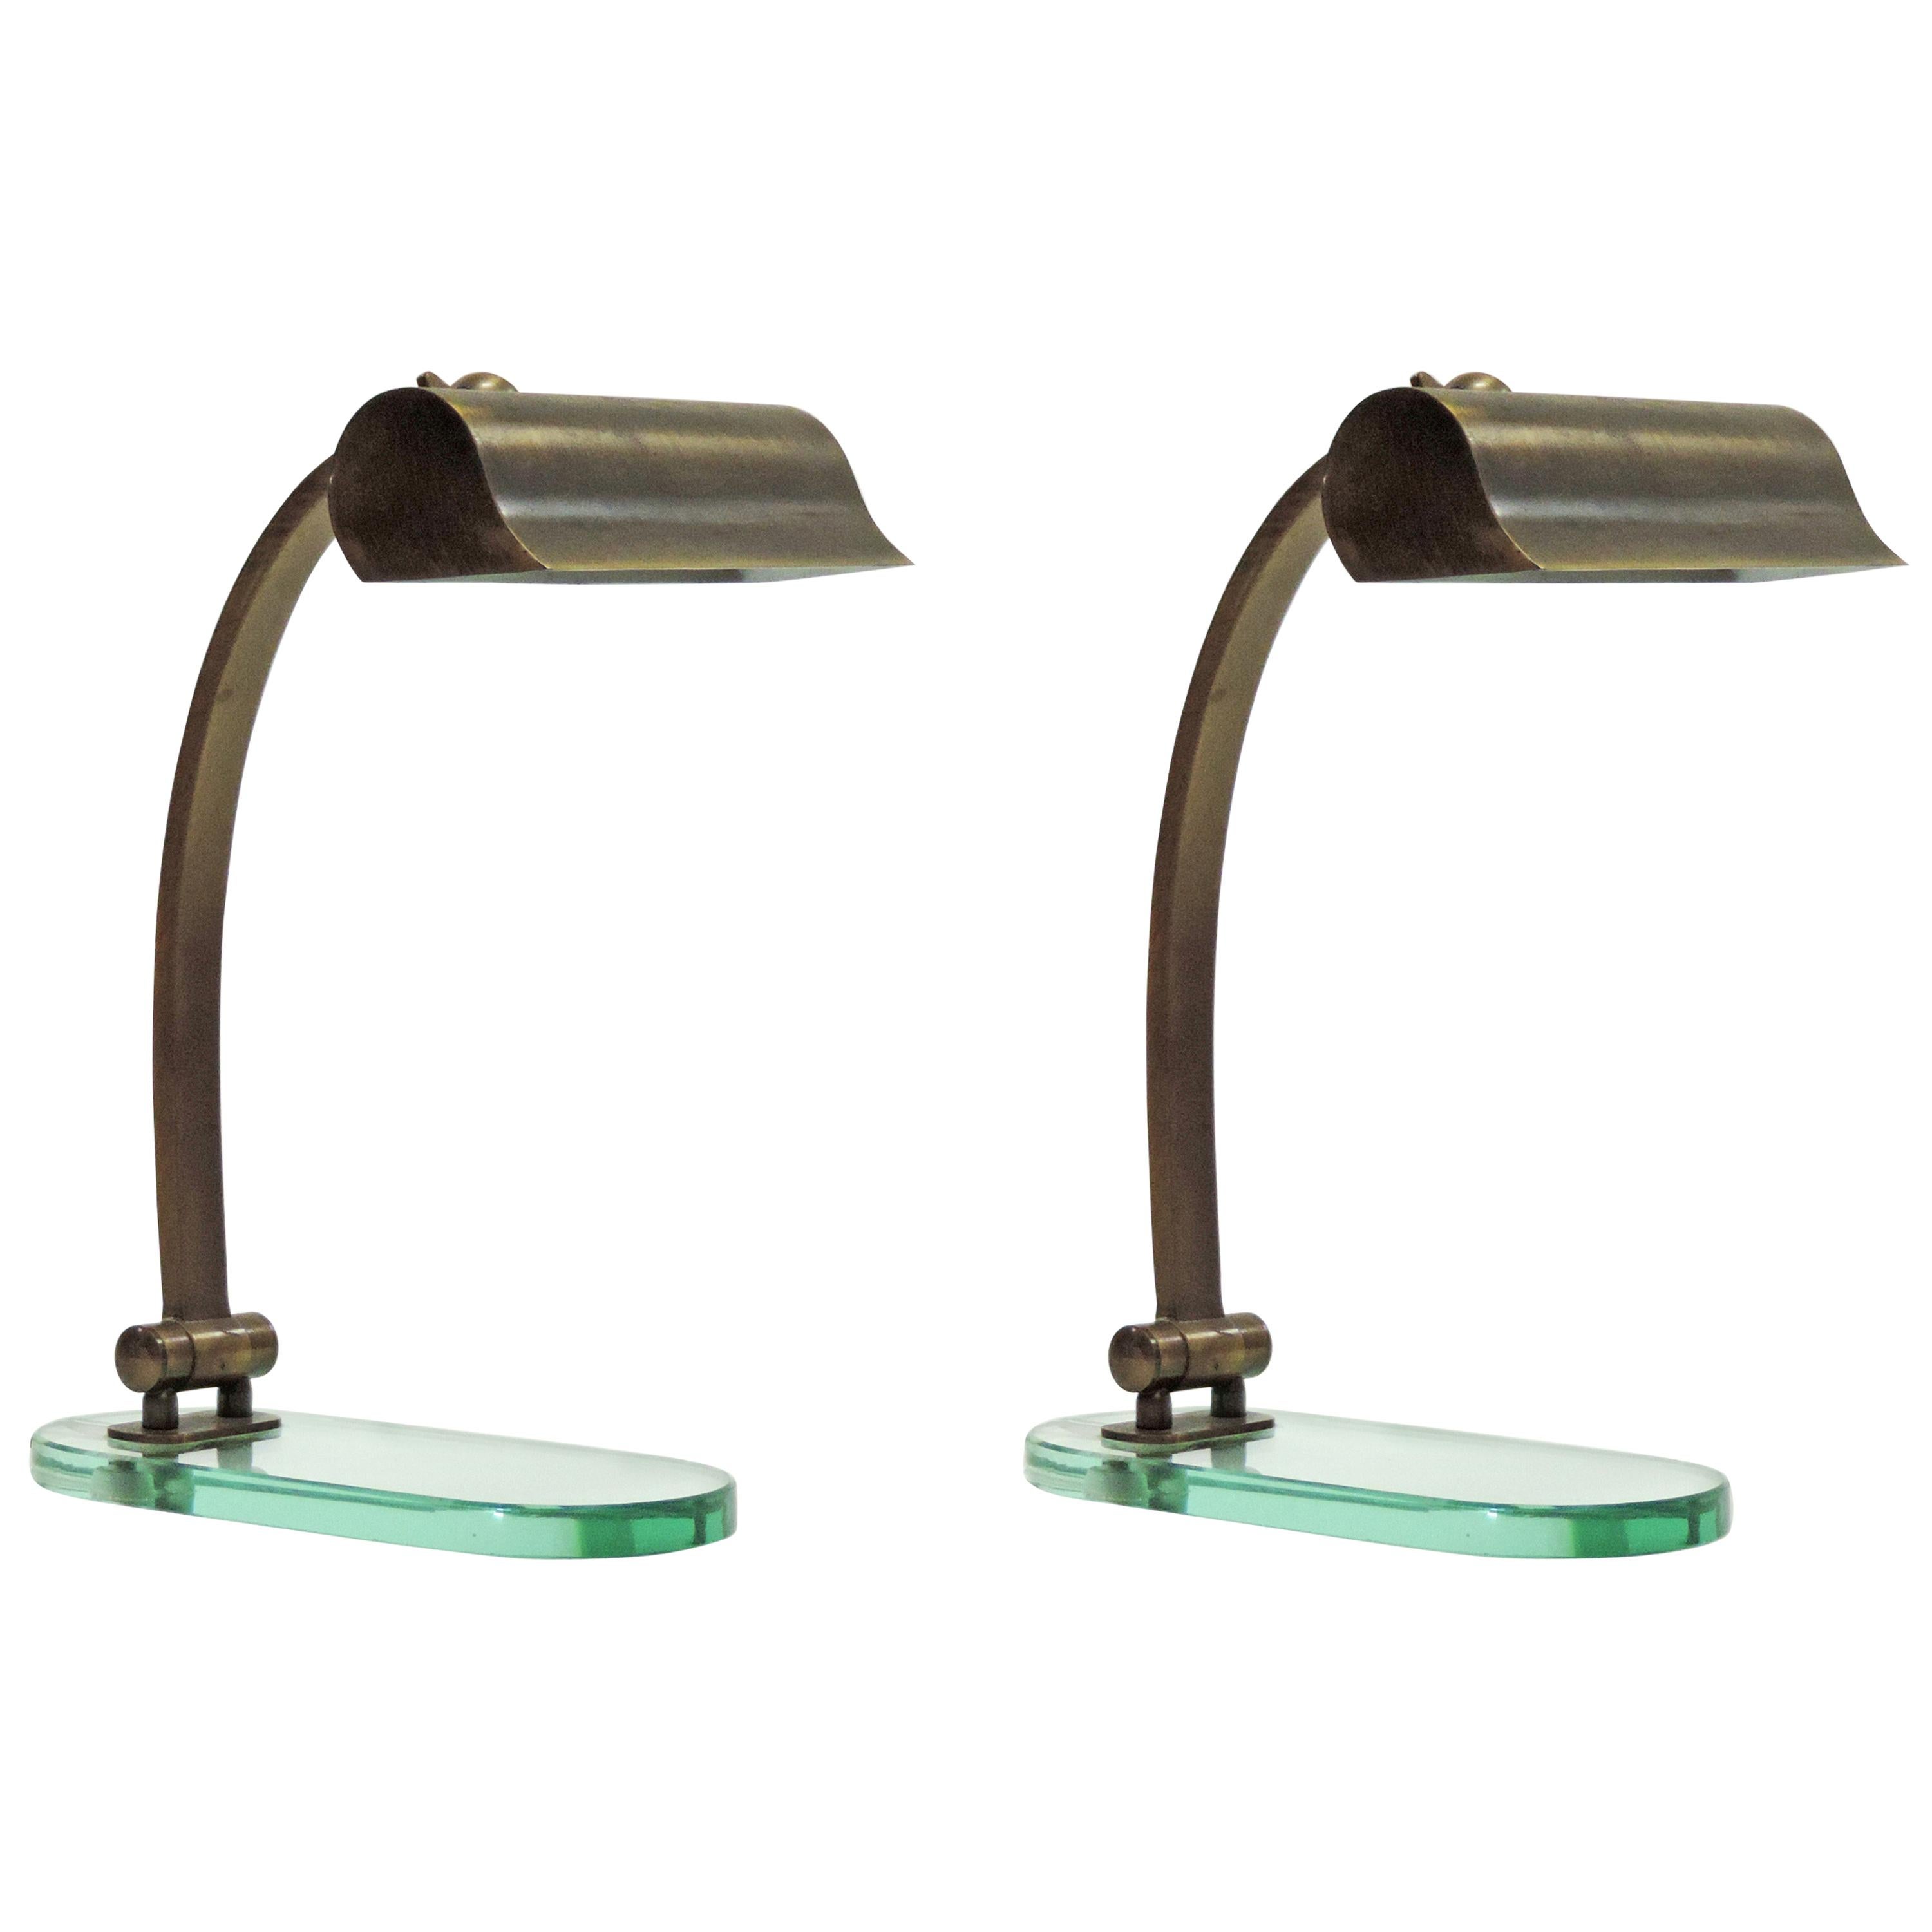 Pair of Italian Adjustable Table Lamps by Lumen in Brass and Glass, Italy, 1950s For Sale